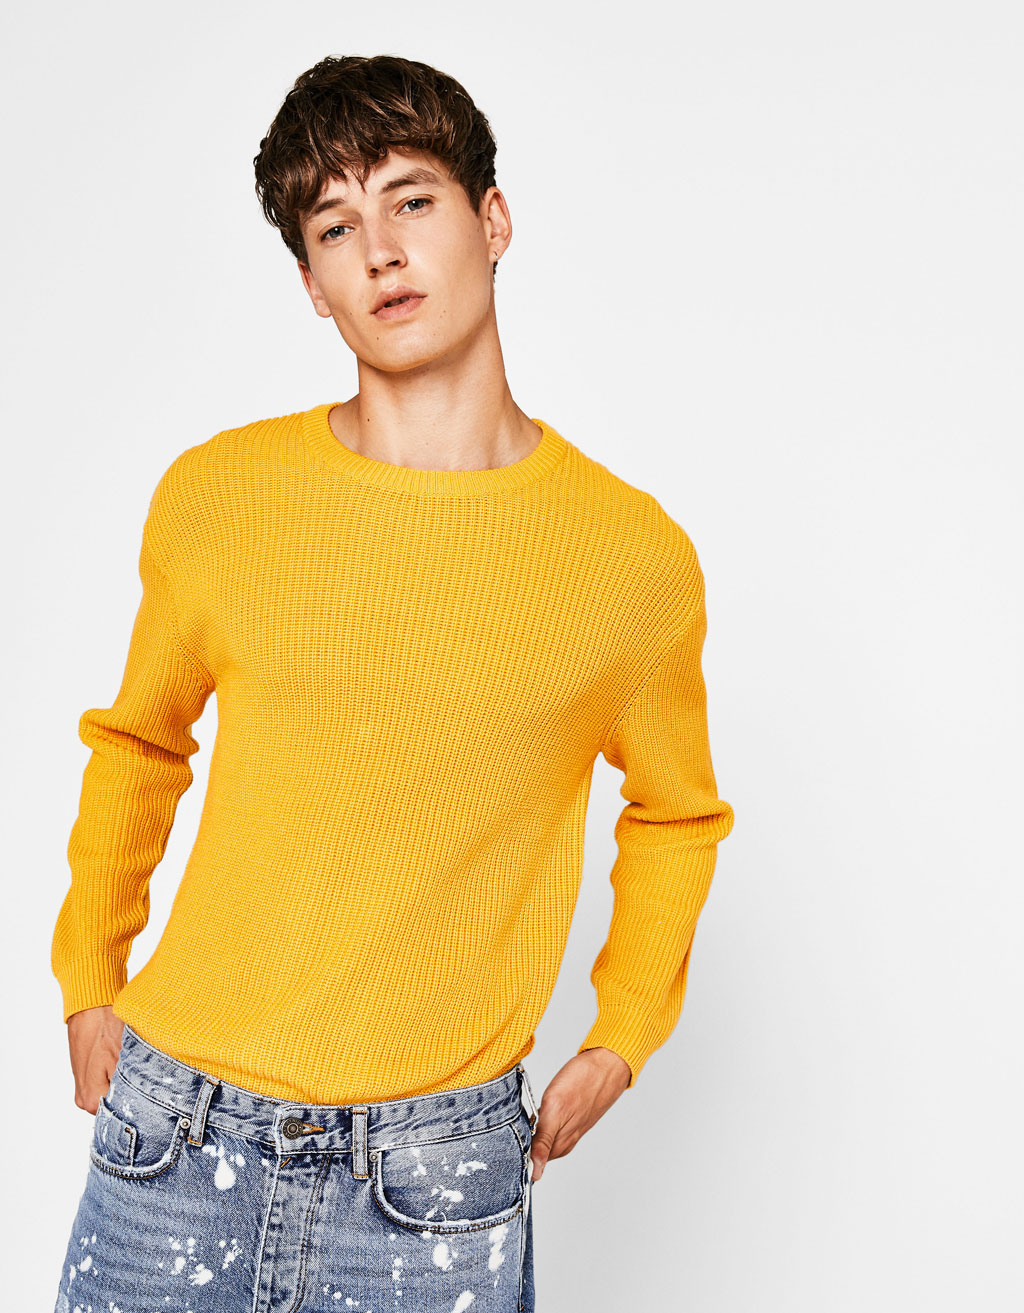 New In for Men - Pre-Autumn Collection 2017 | Bershka